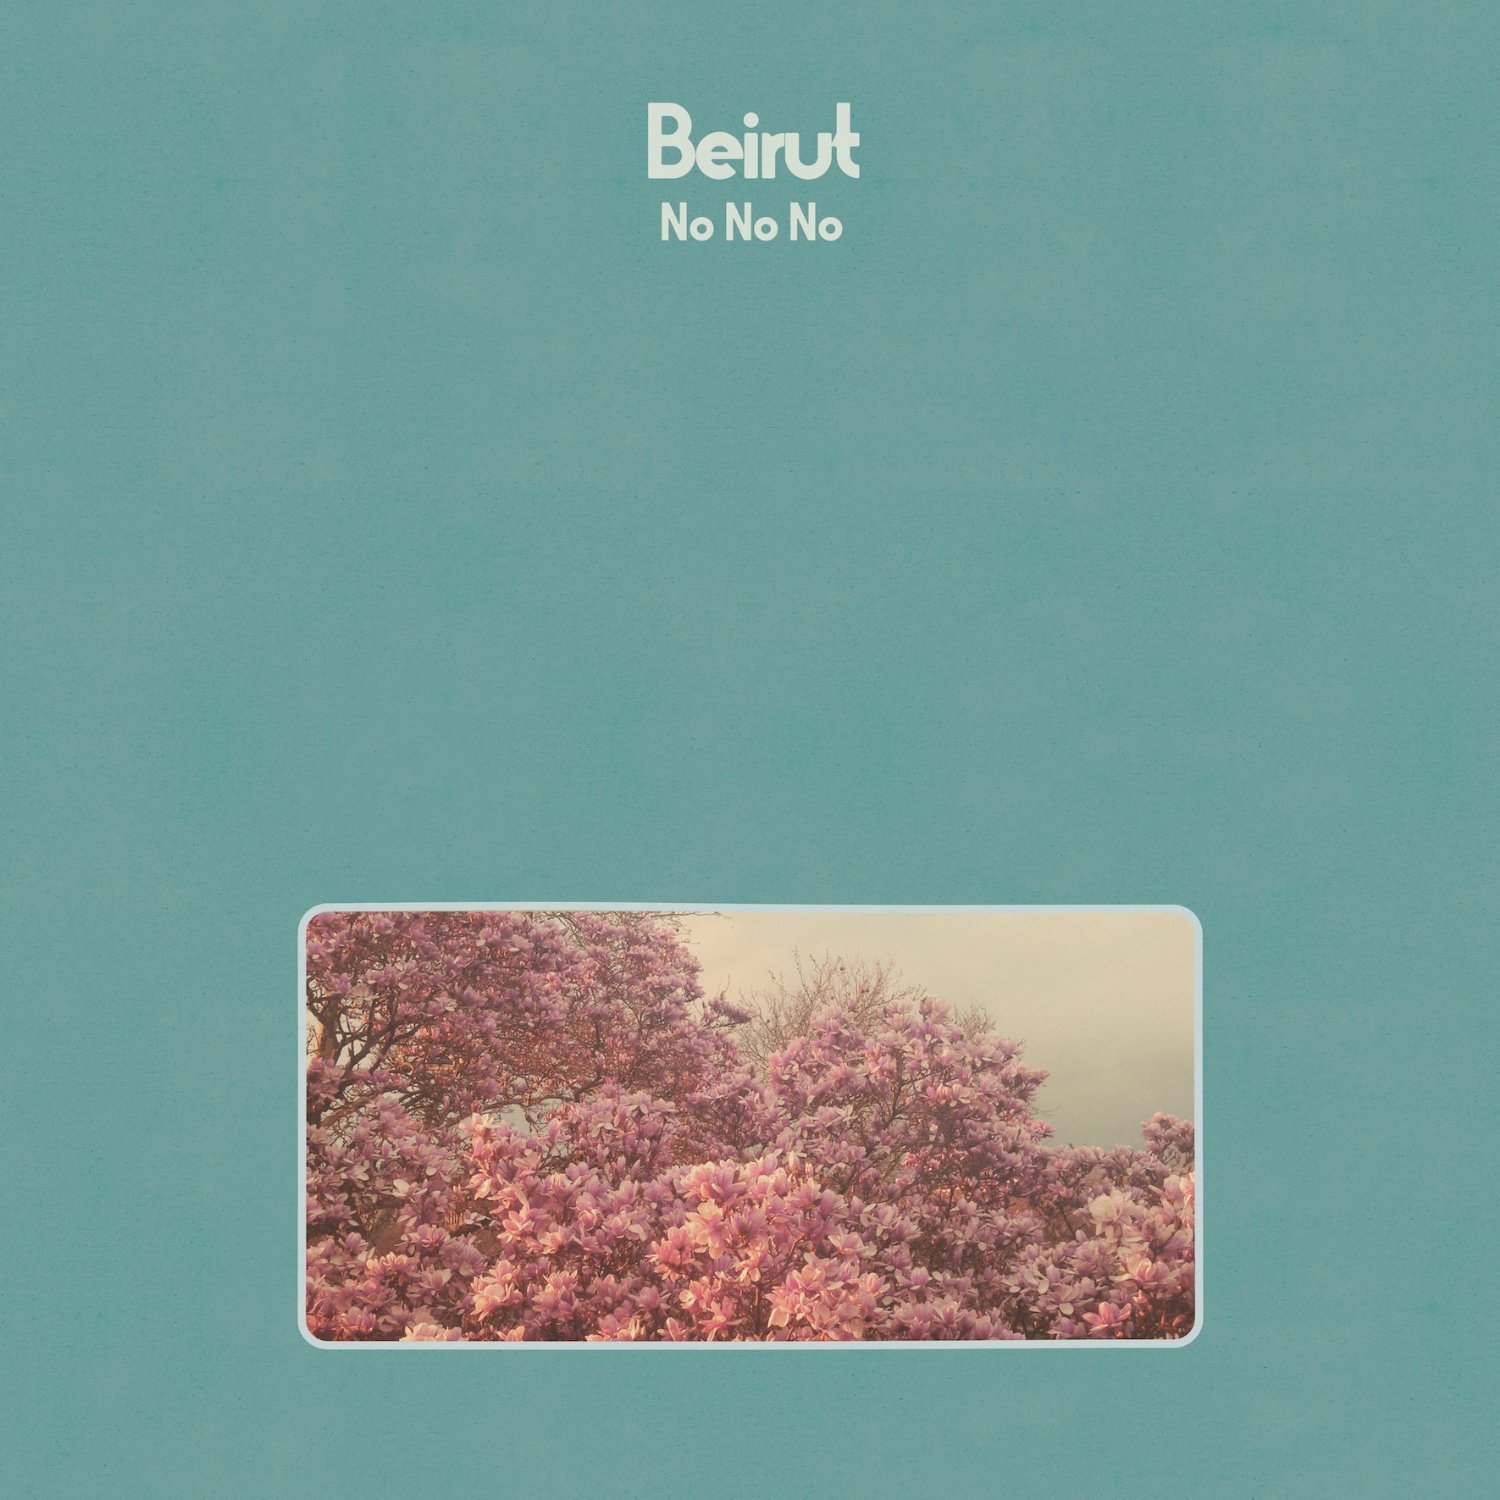 Review of Beirut's 'No No No', the bands forthcoming full-length comes out September 11th via 4AD.